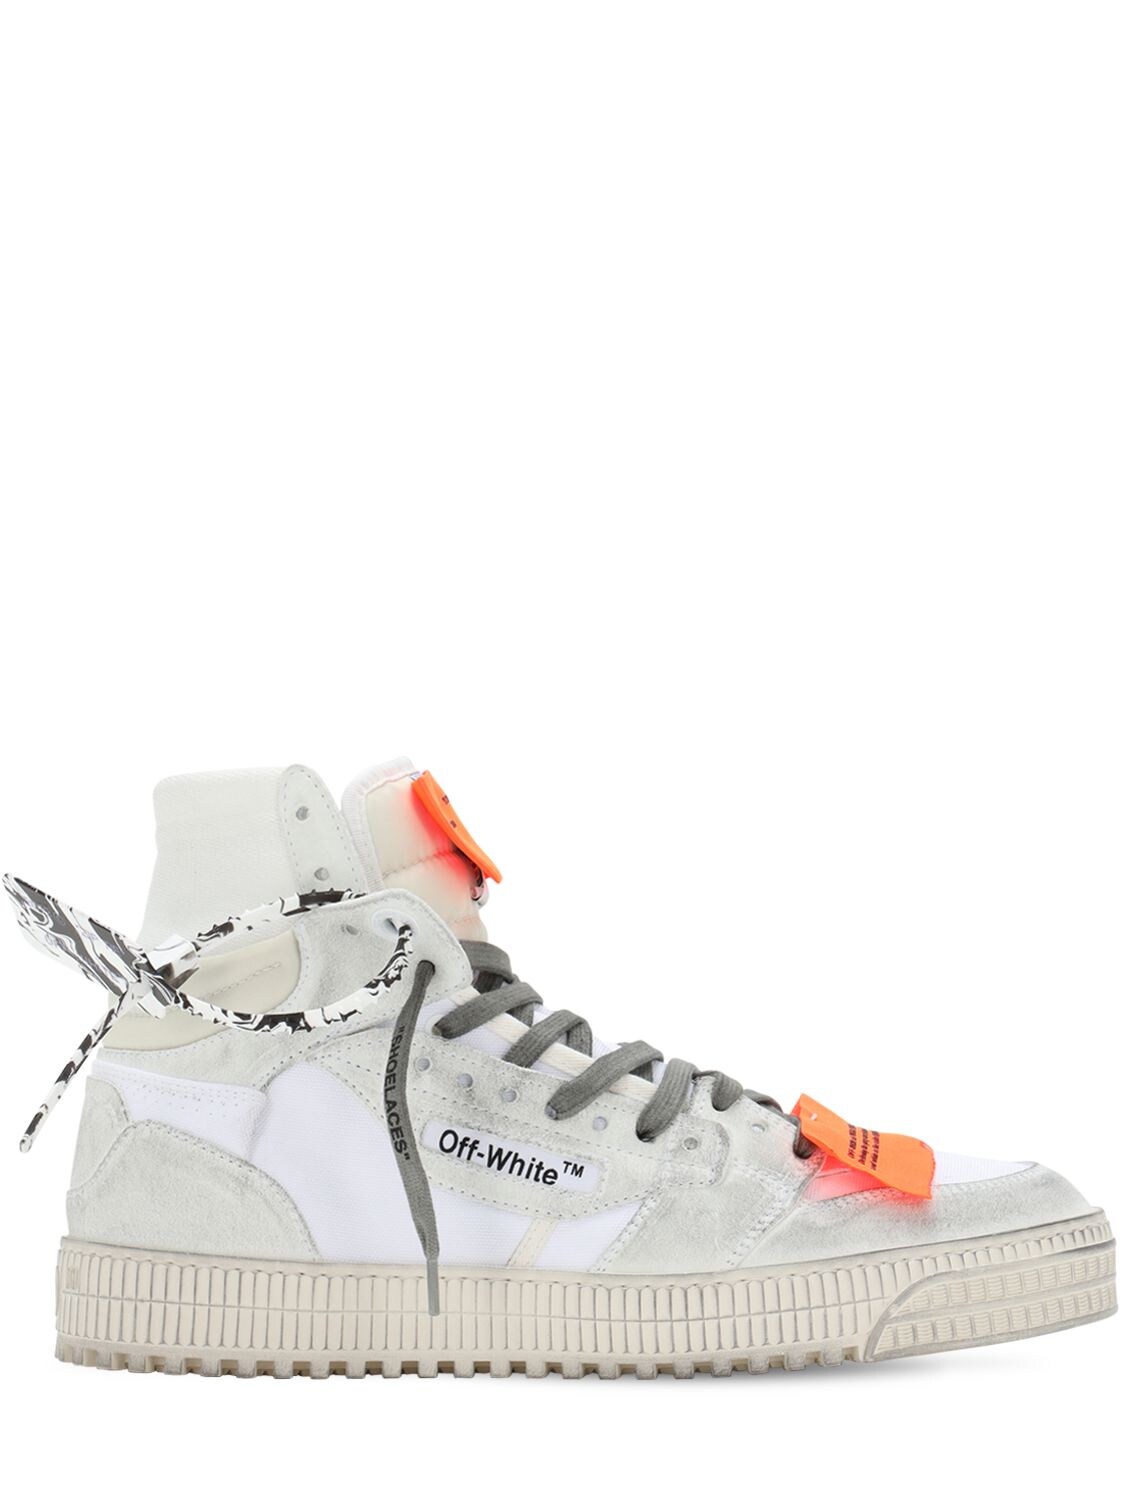 OFF-WHITE OFF COURT HIGH LEATHER & CANVAS trainers,72IJSY001-MDMWMW2